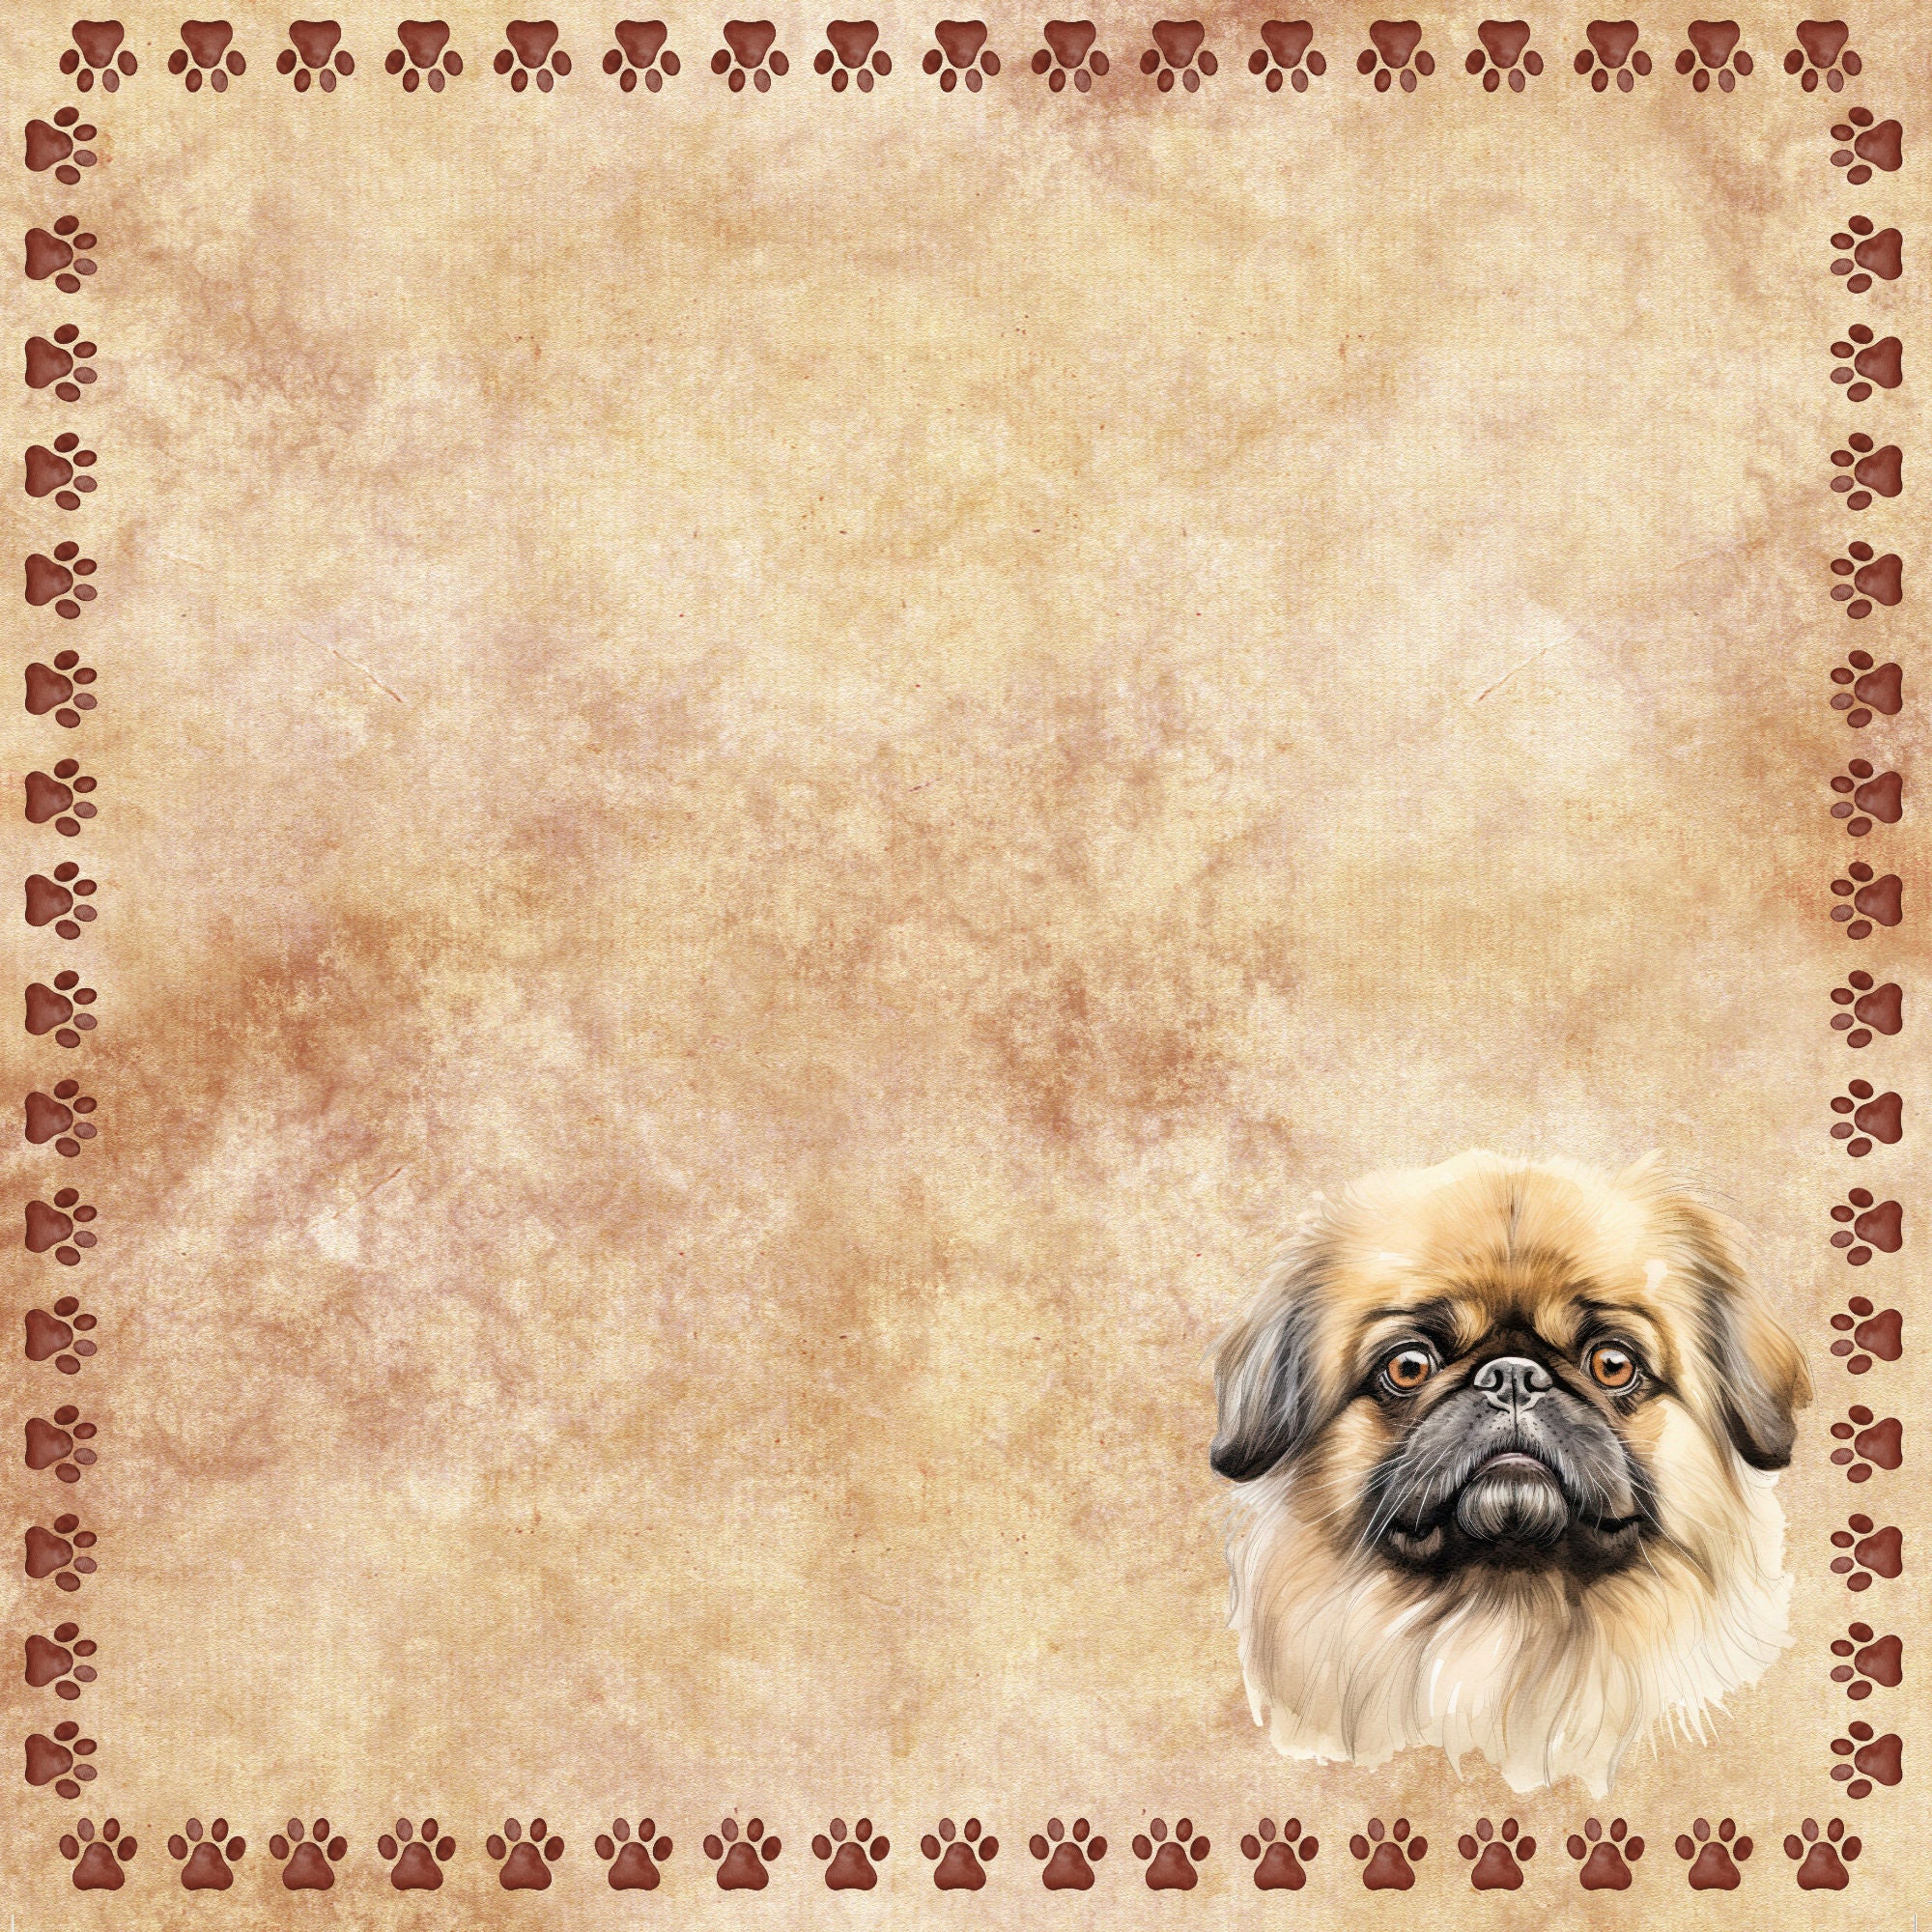 Dog Breeds Collection Pekinese 12 x 12 Double-Sided Scrapbook Paper by SSC Designs